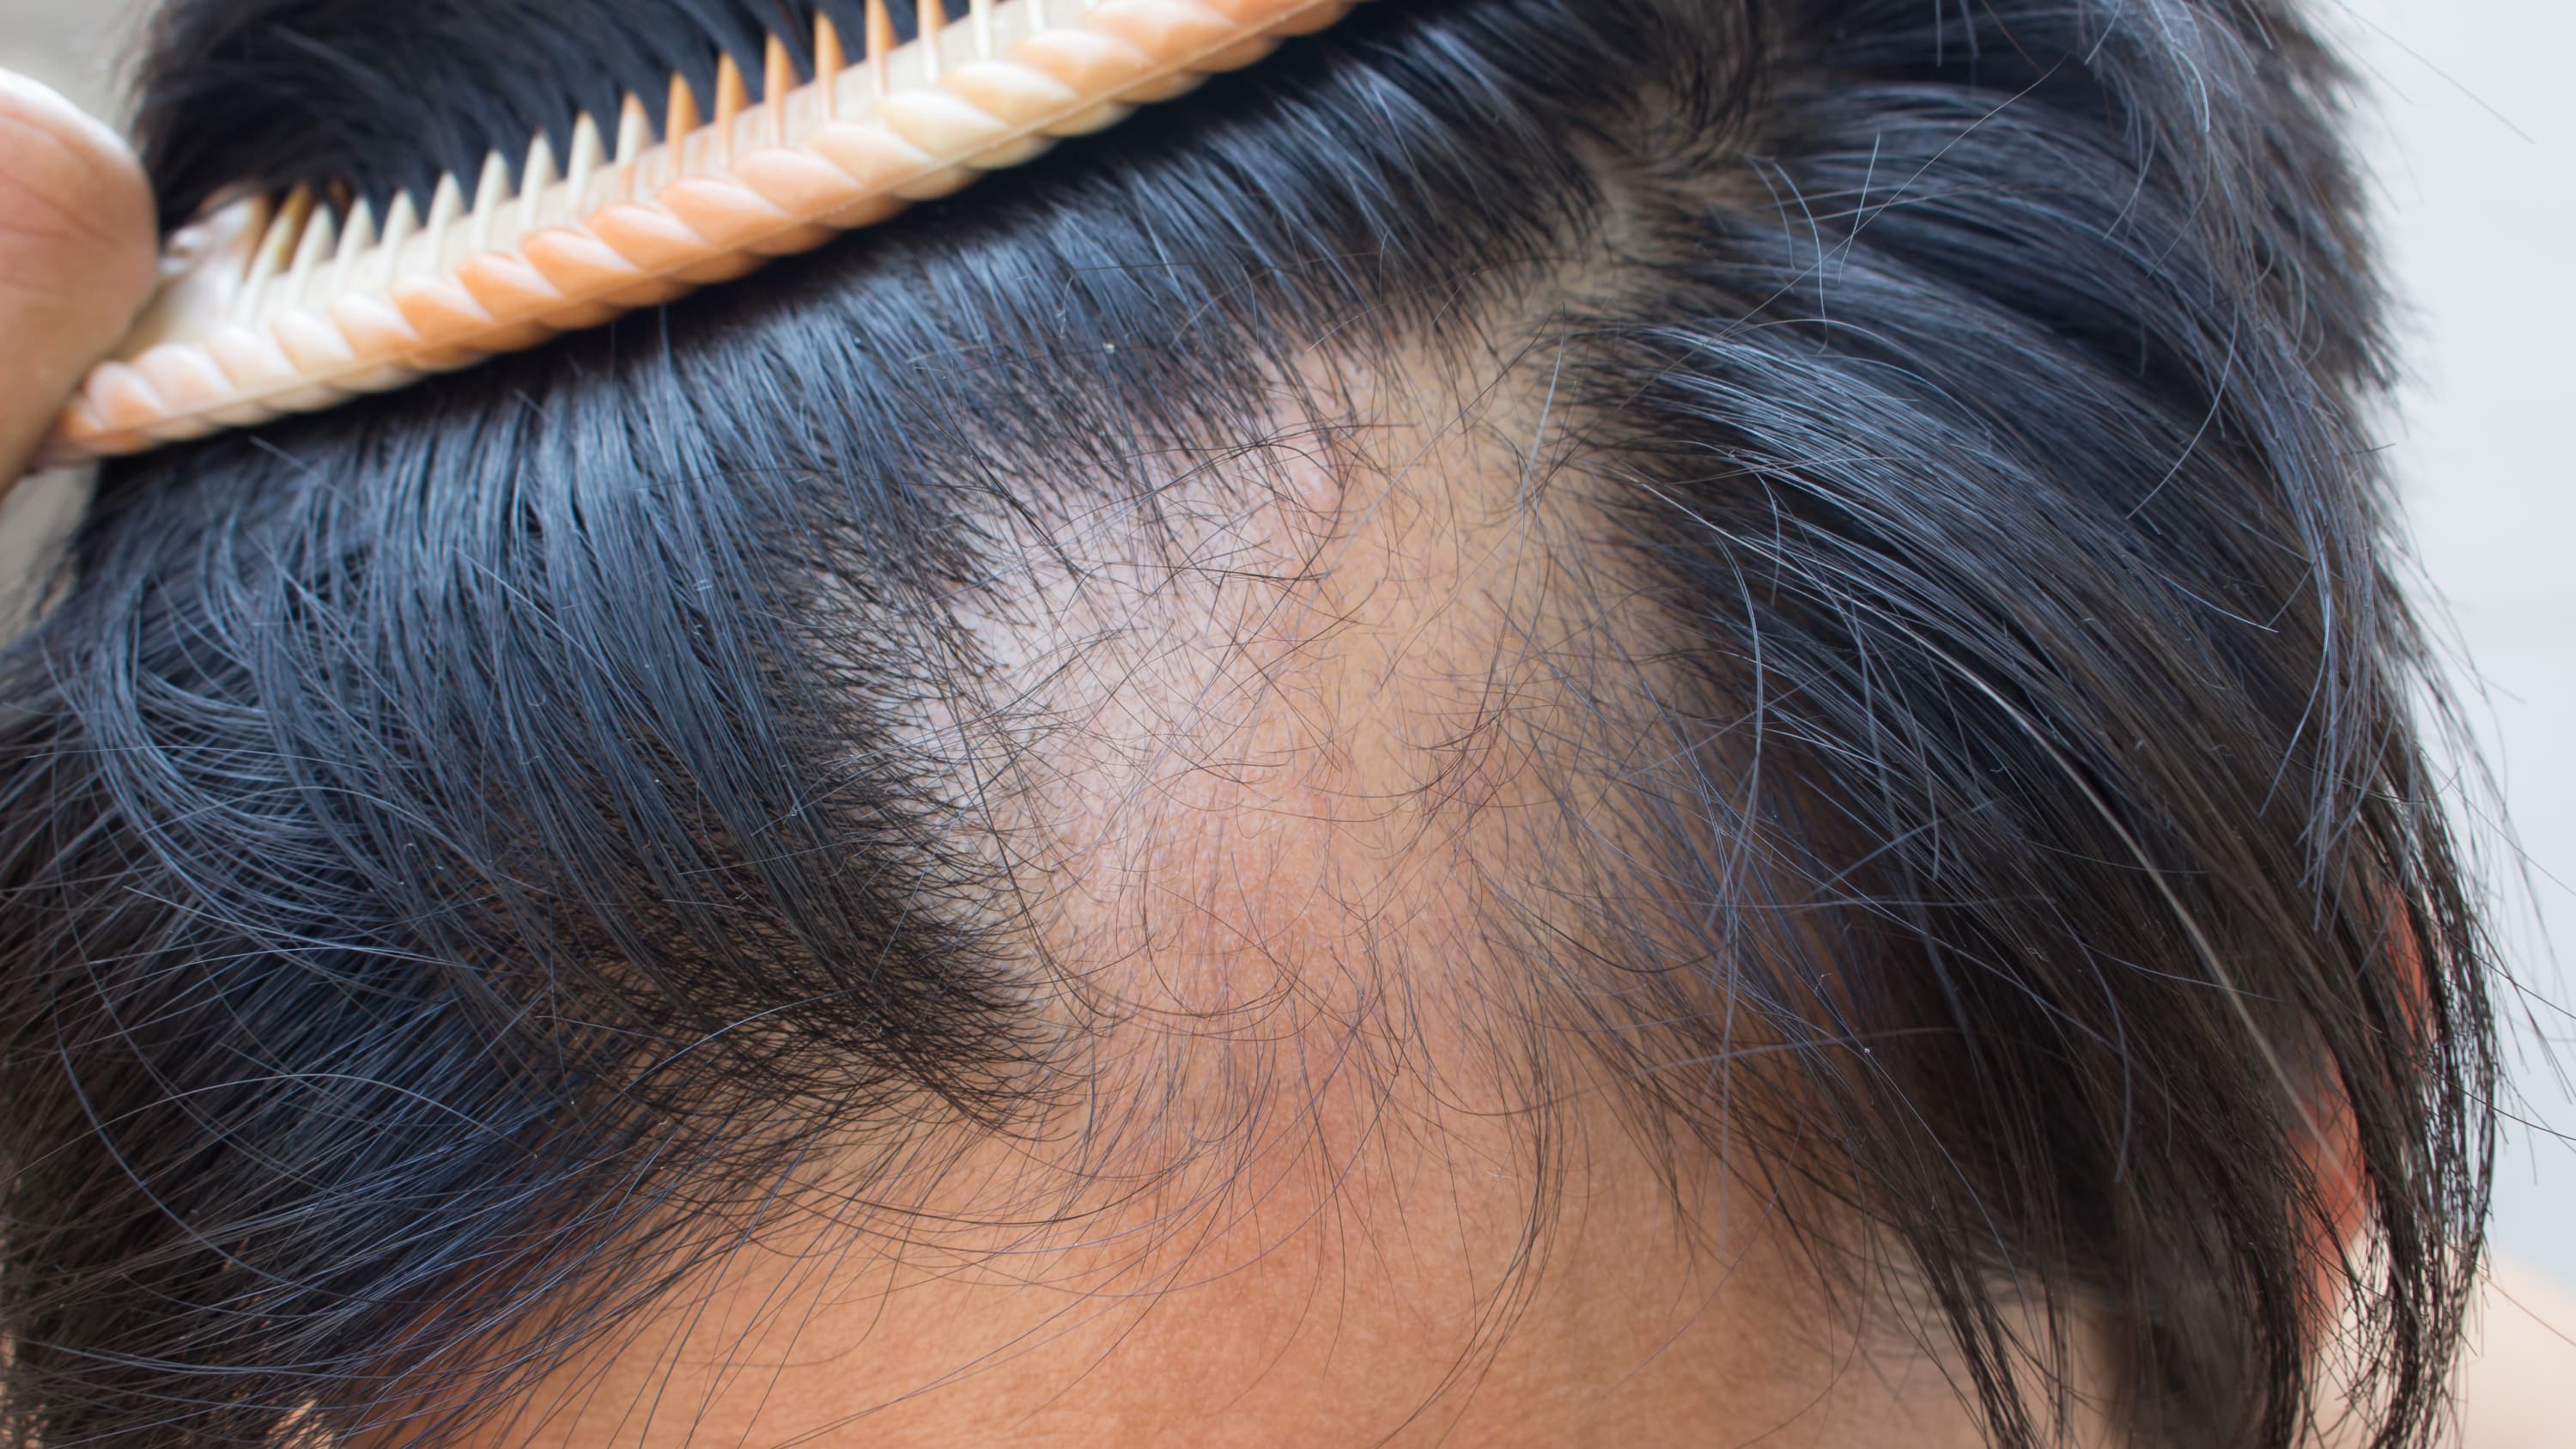 Someone with alopecia combing back black hair to reveal a bald spot.